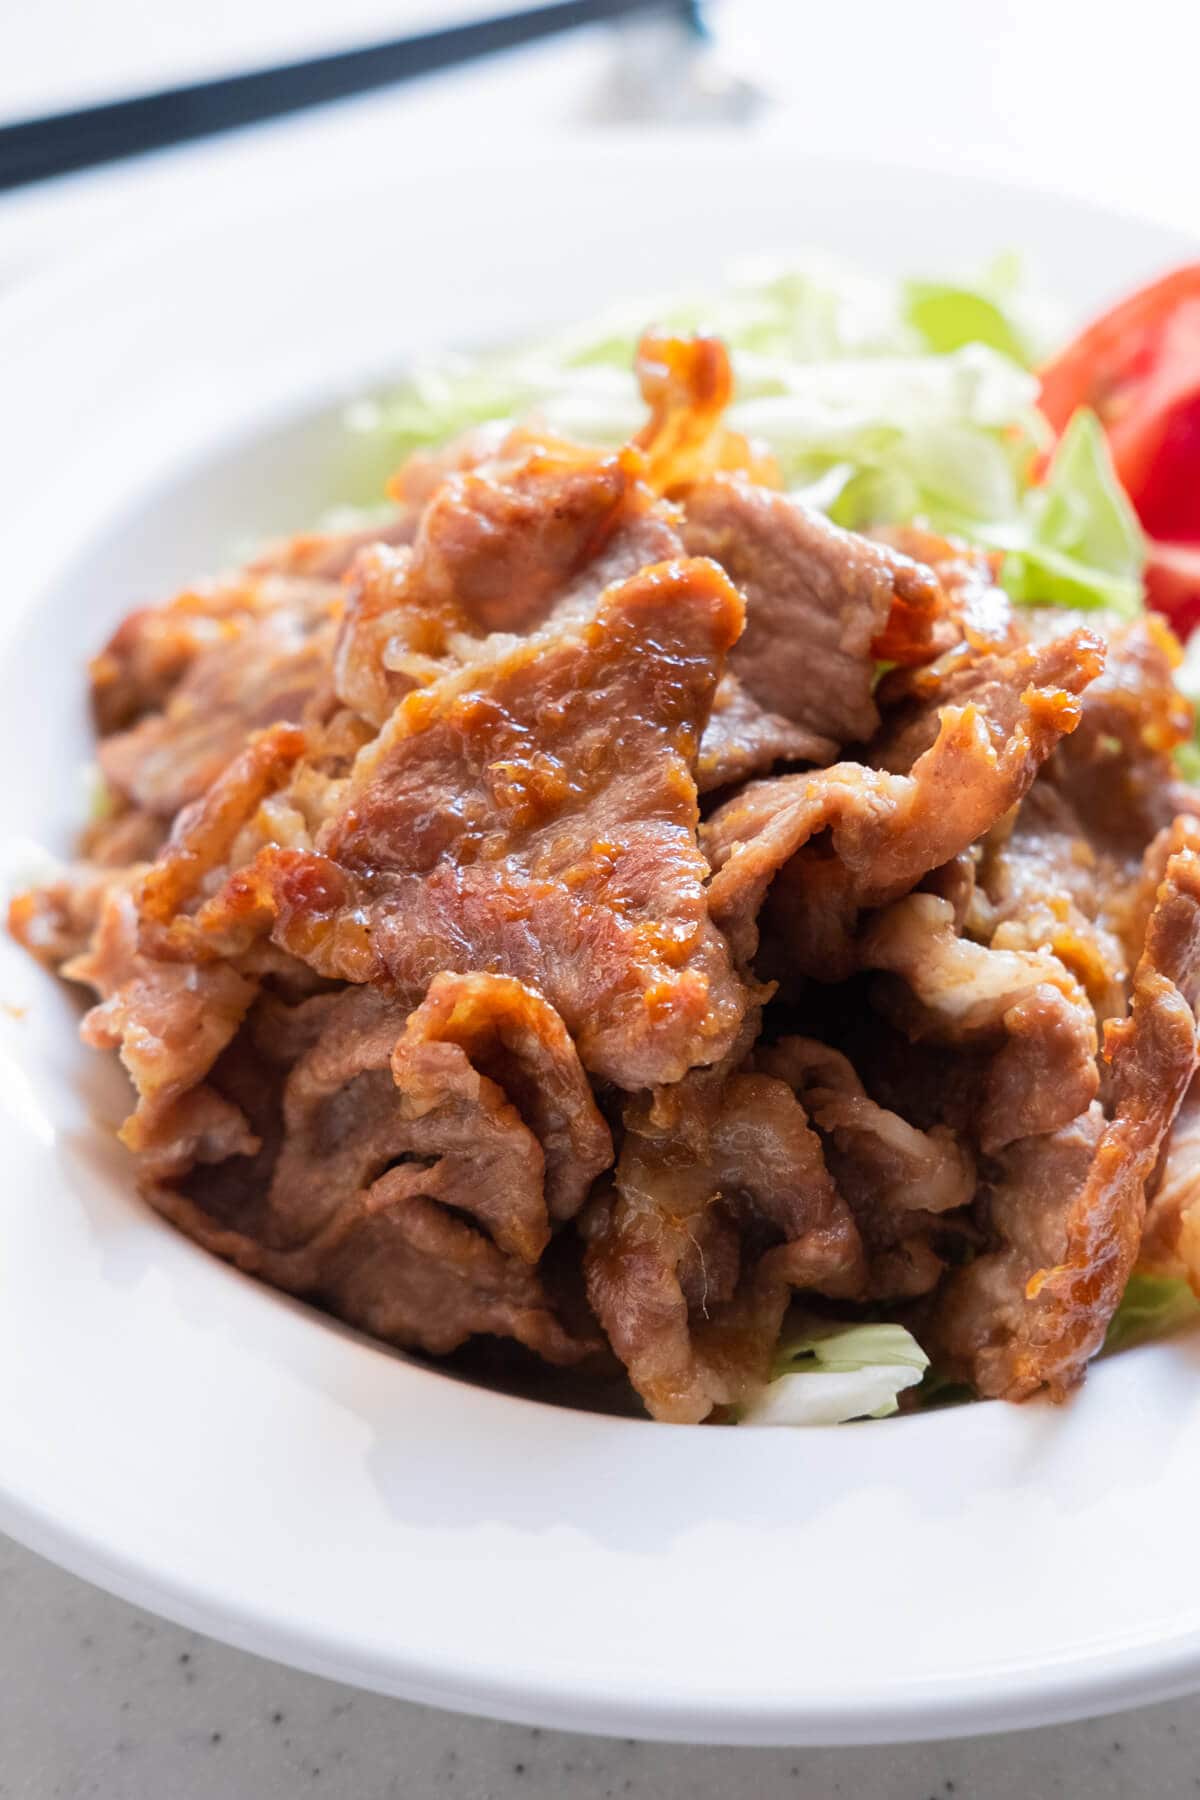 Tender, juicy pork slices coated with savory ginger sauce.